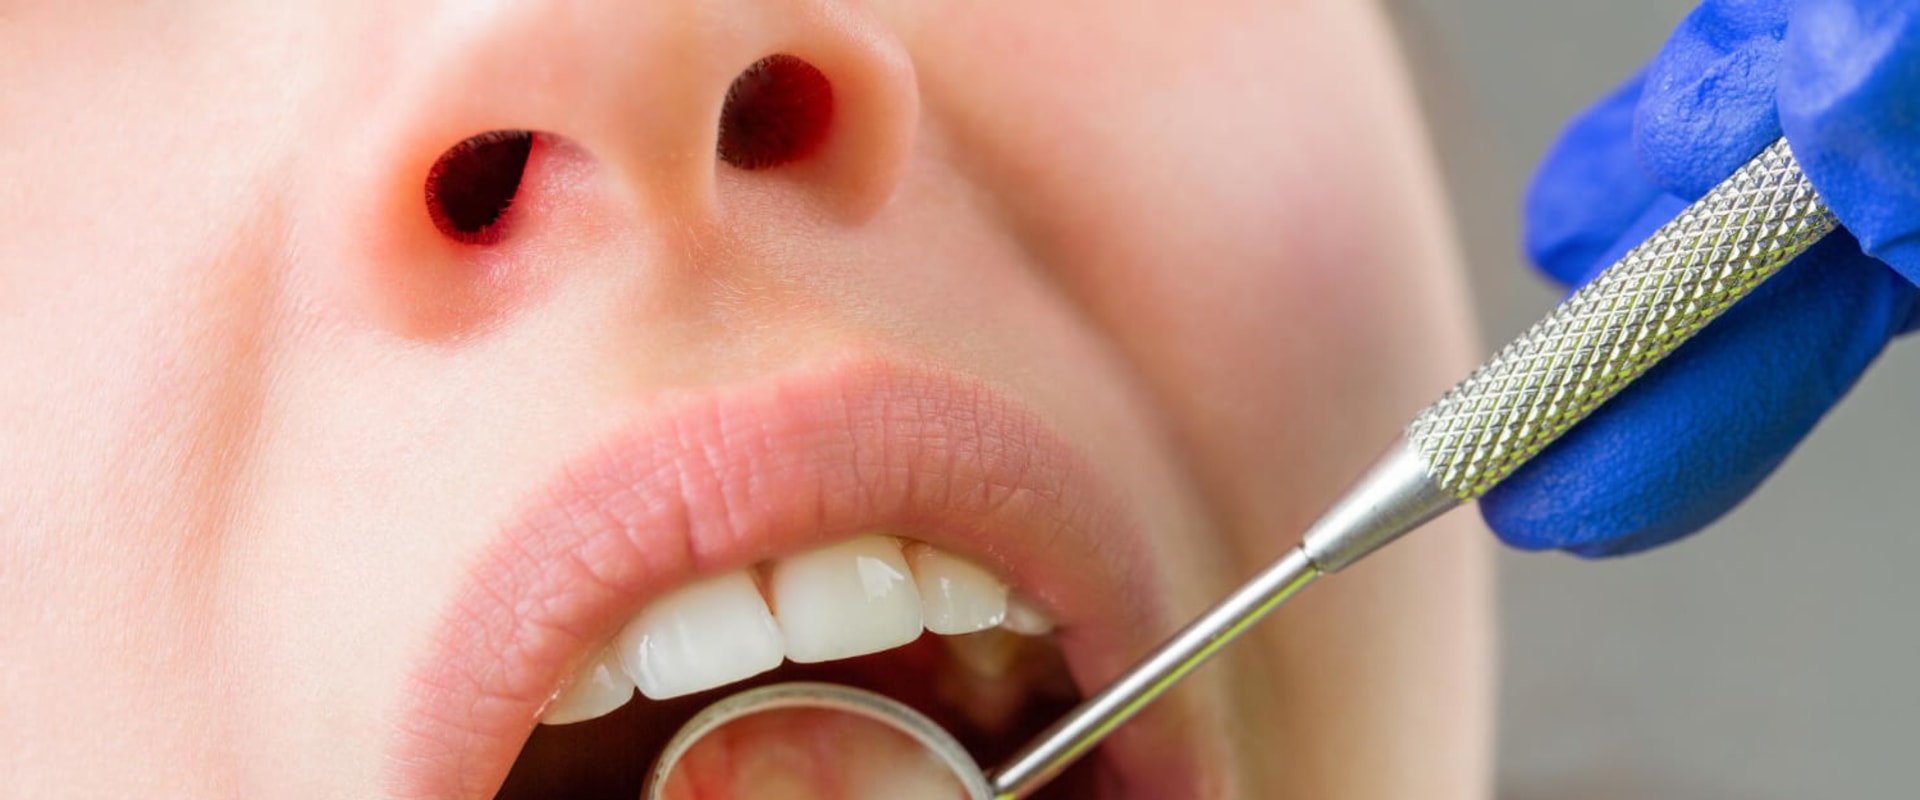 5 Questions to Ask Your Dentist Before Getting a Smile Makeover